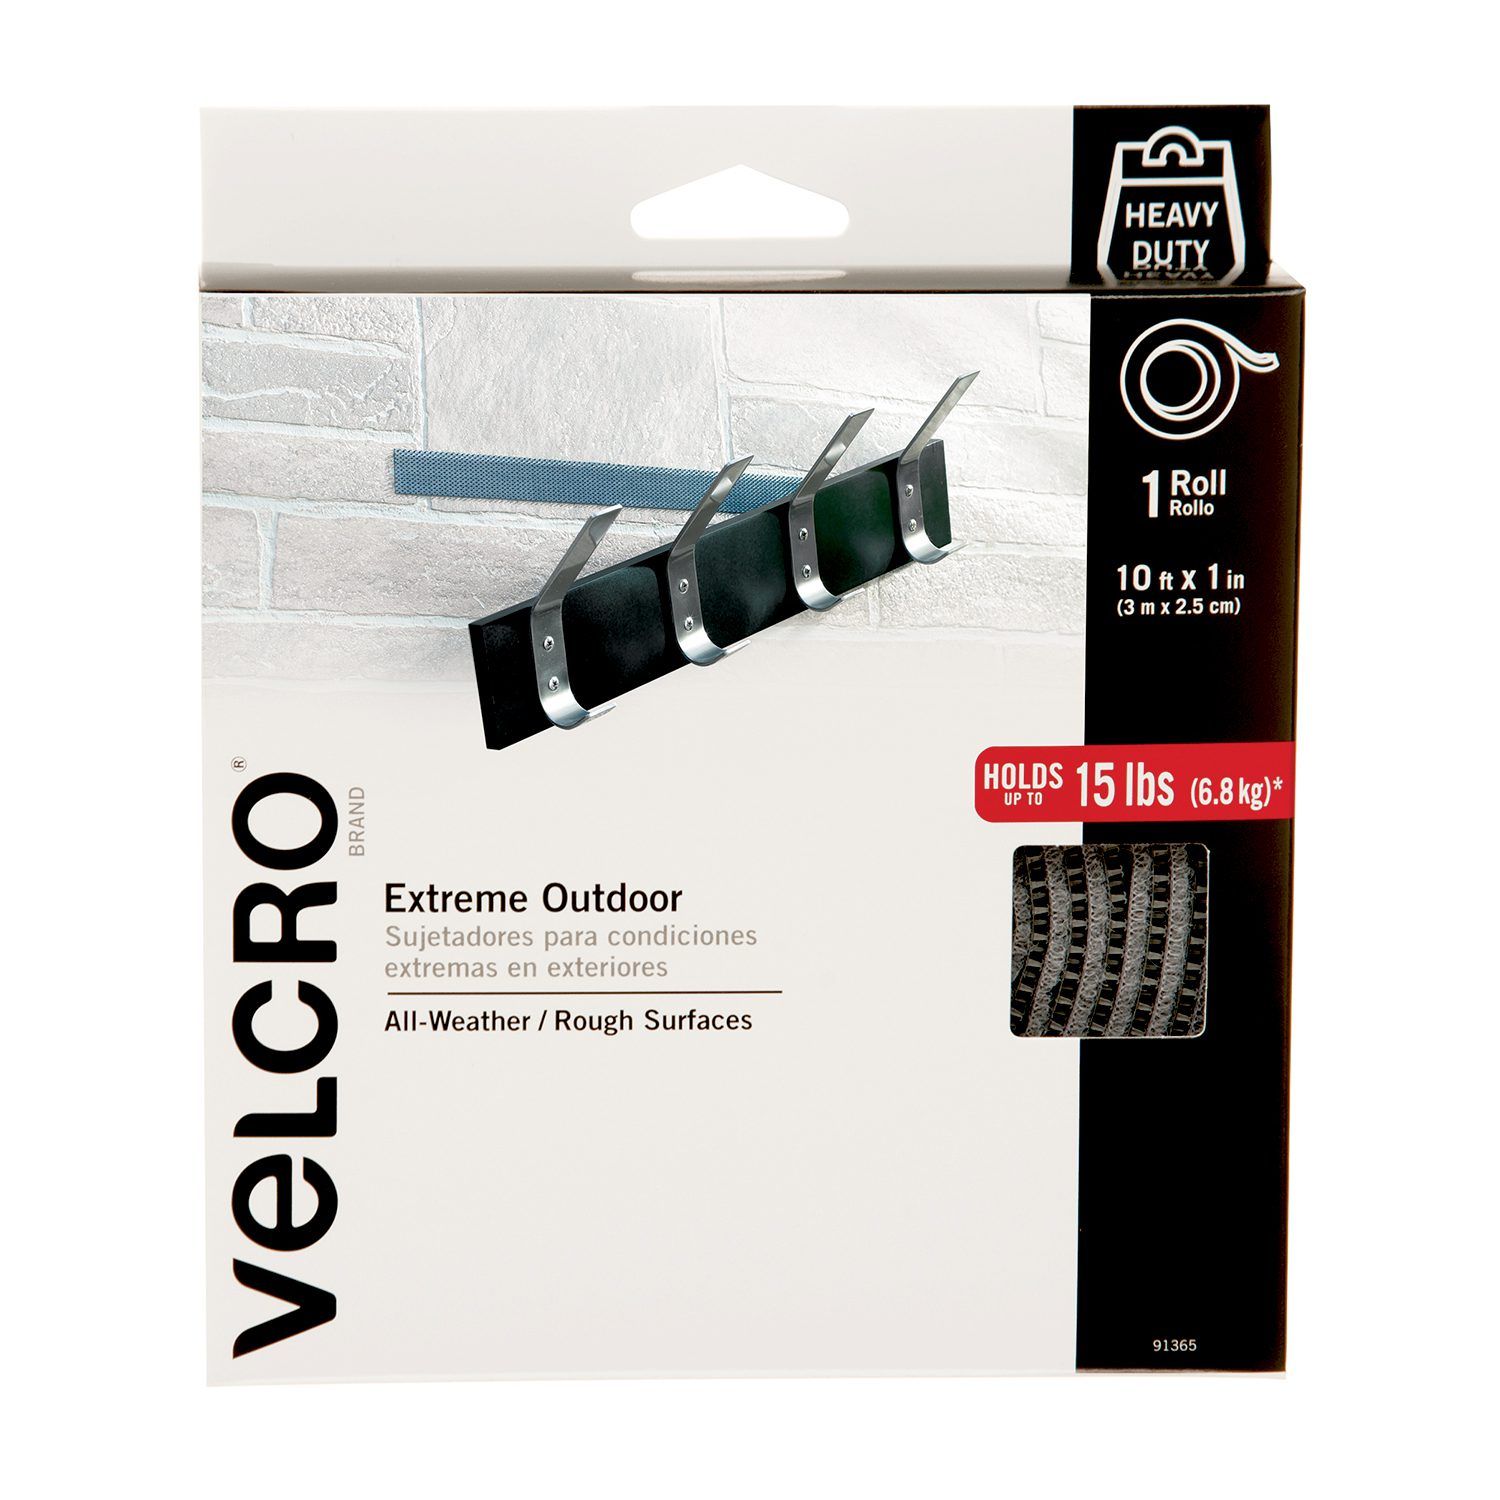 VELCRO Brand Extreme Outdoor Mounting Tape, 20Ft x 1 In Holds 15 lbs, Strong Heavy Duty Stick on Adhesive